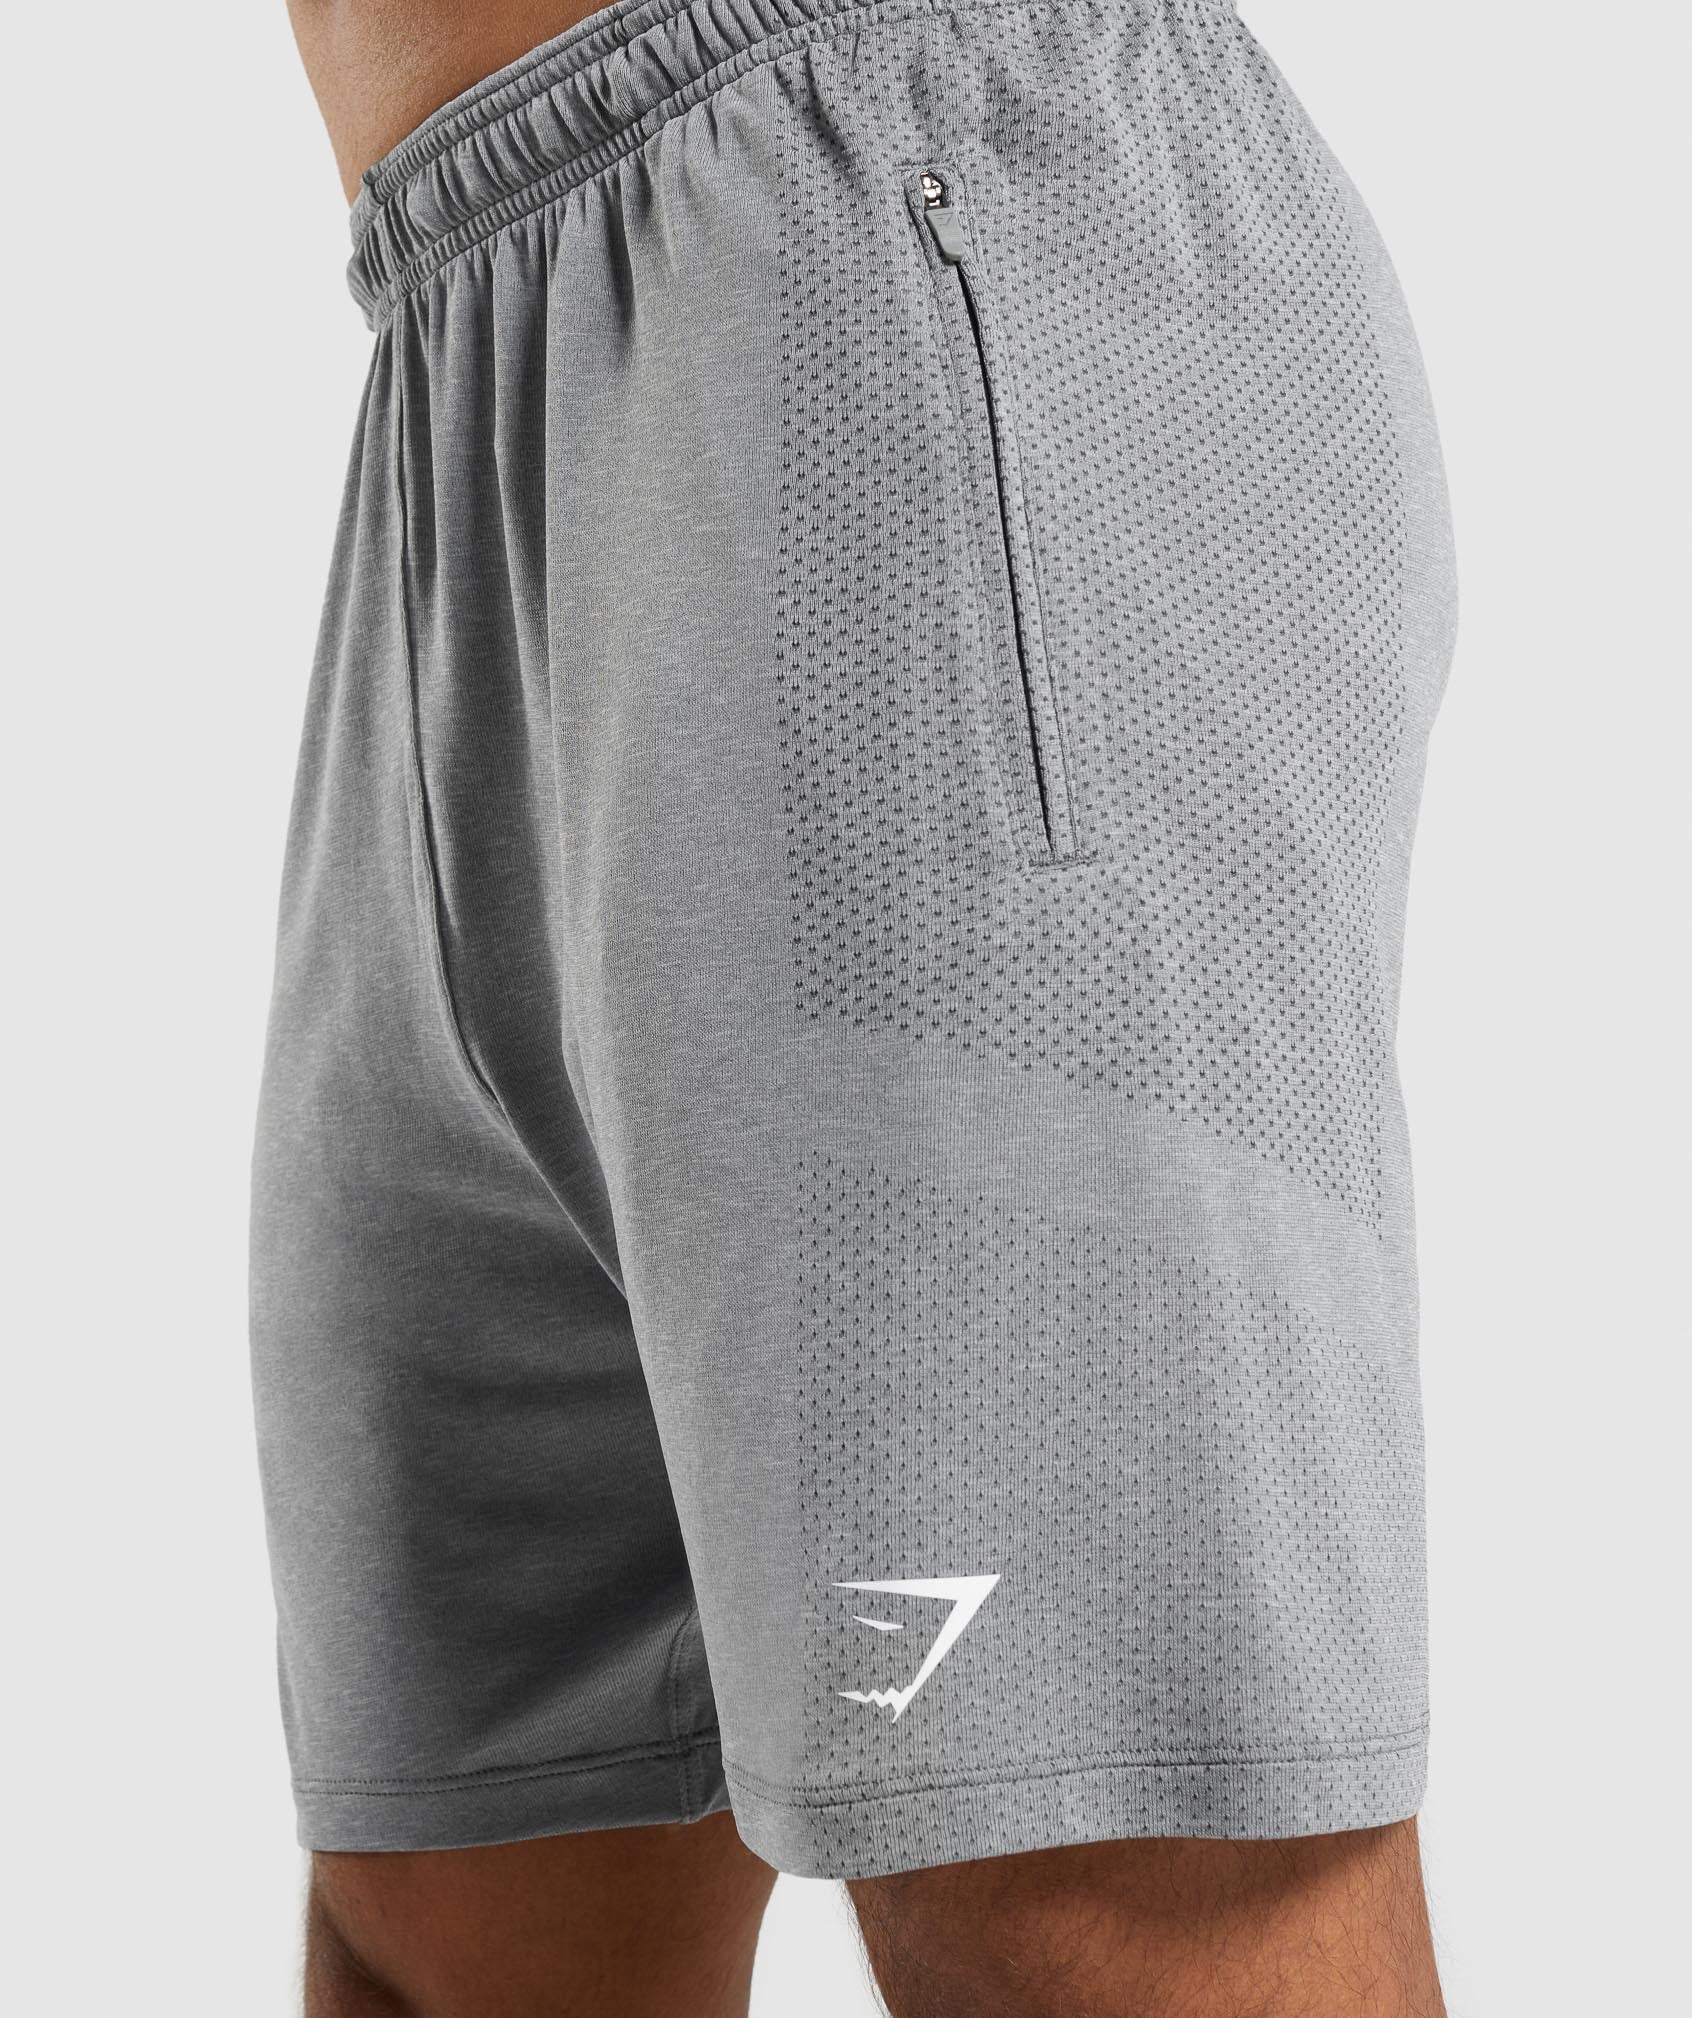 Vital Light Shorts in Charcoal Grey Marl - view 5